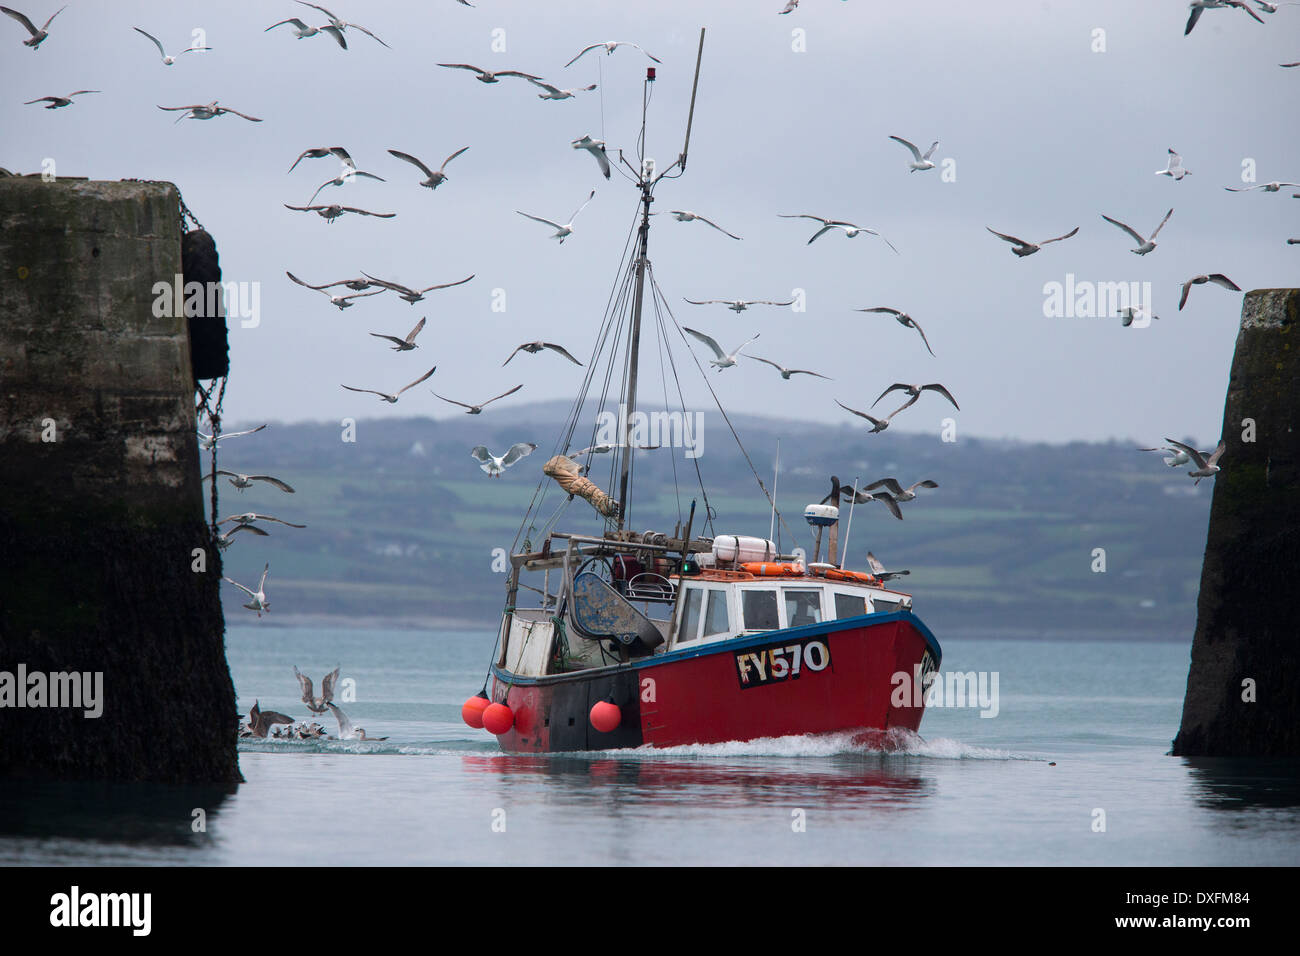 A small fishing boat entering Newlyn harbor, Cornwall, UK, with a following flock of seagulls. Stock Photo